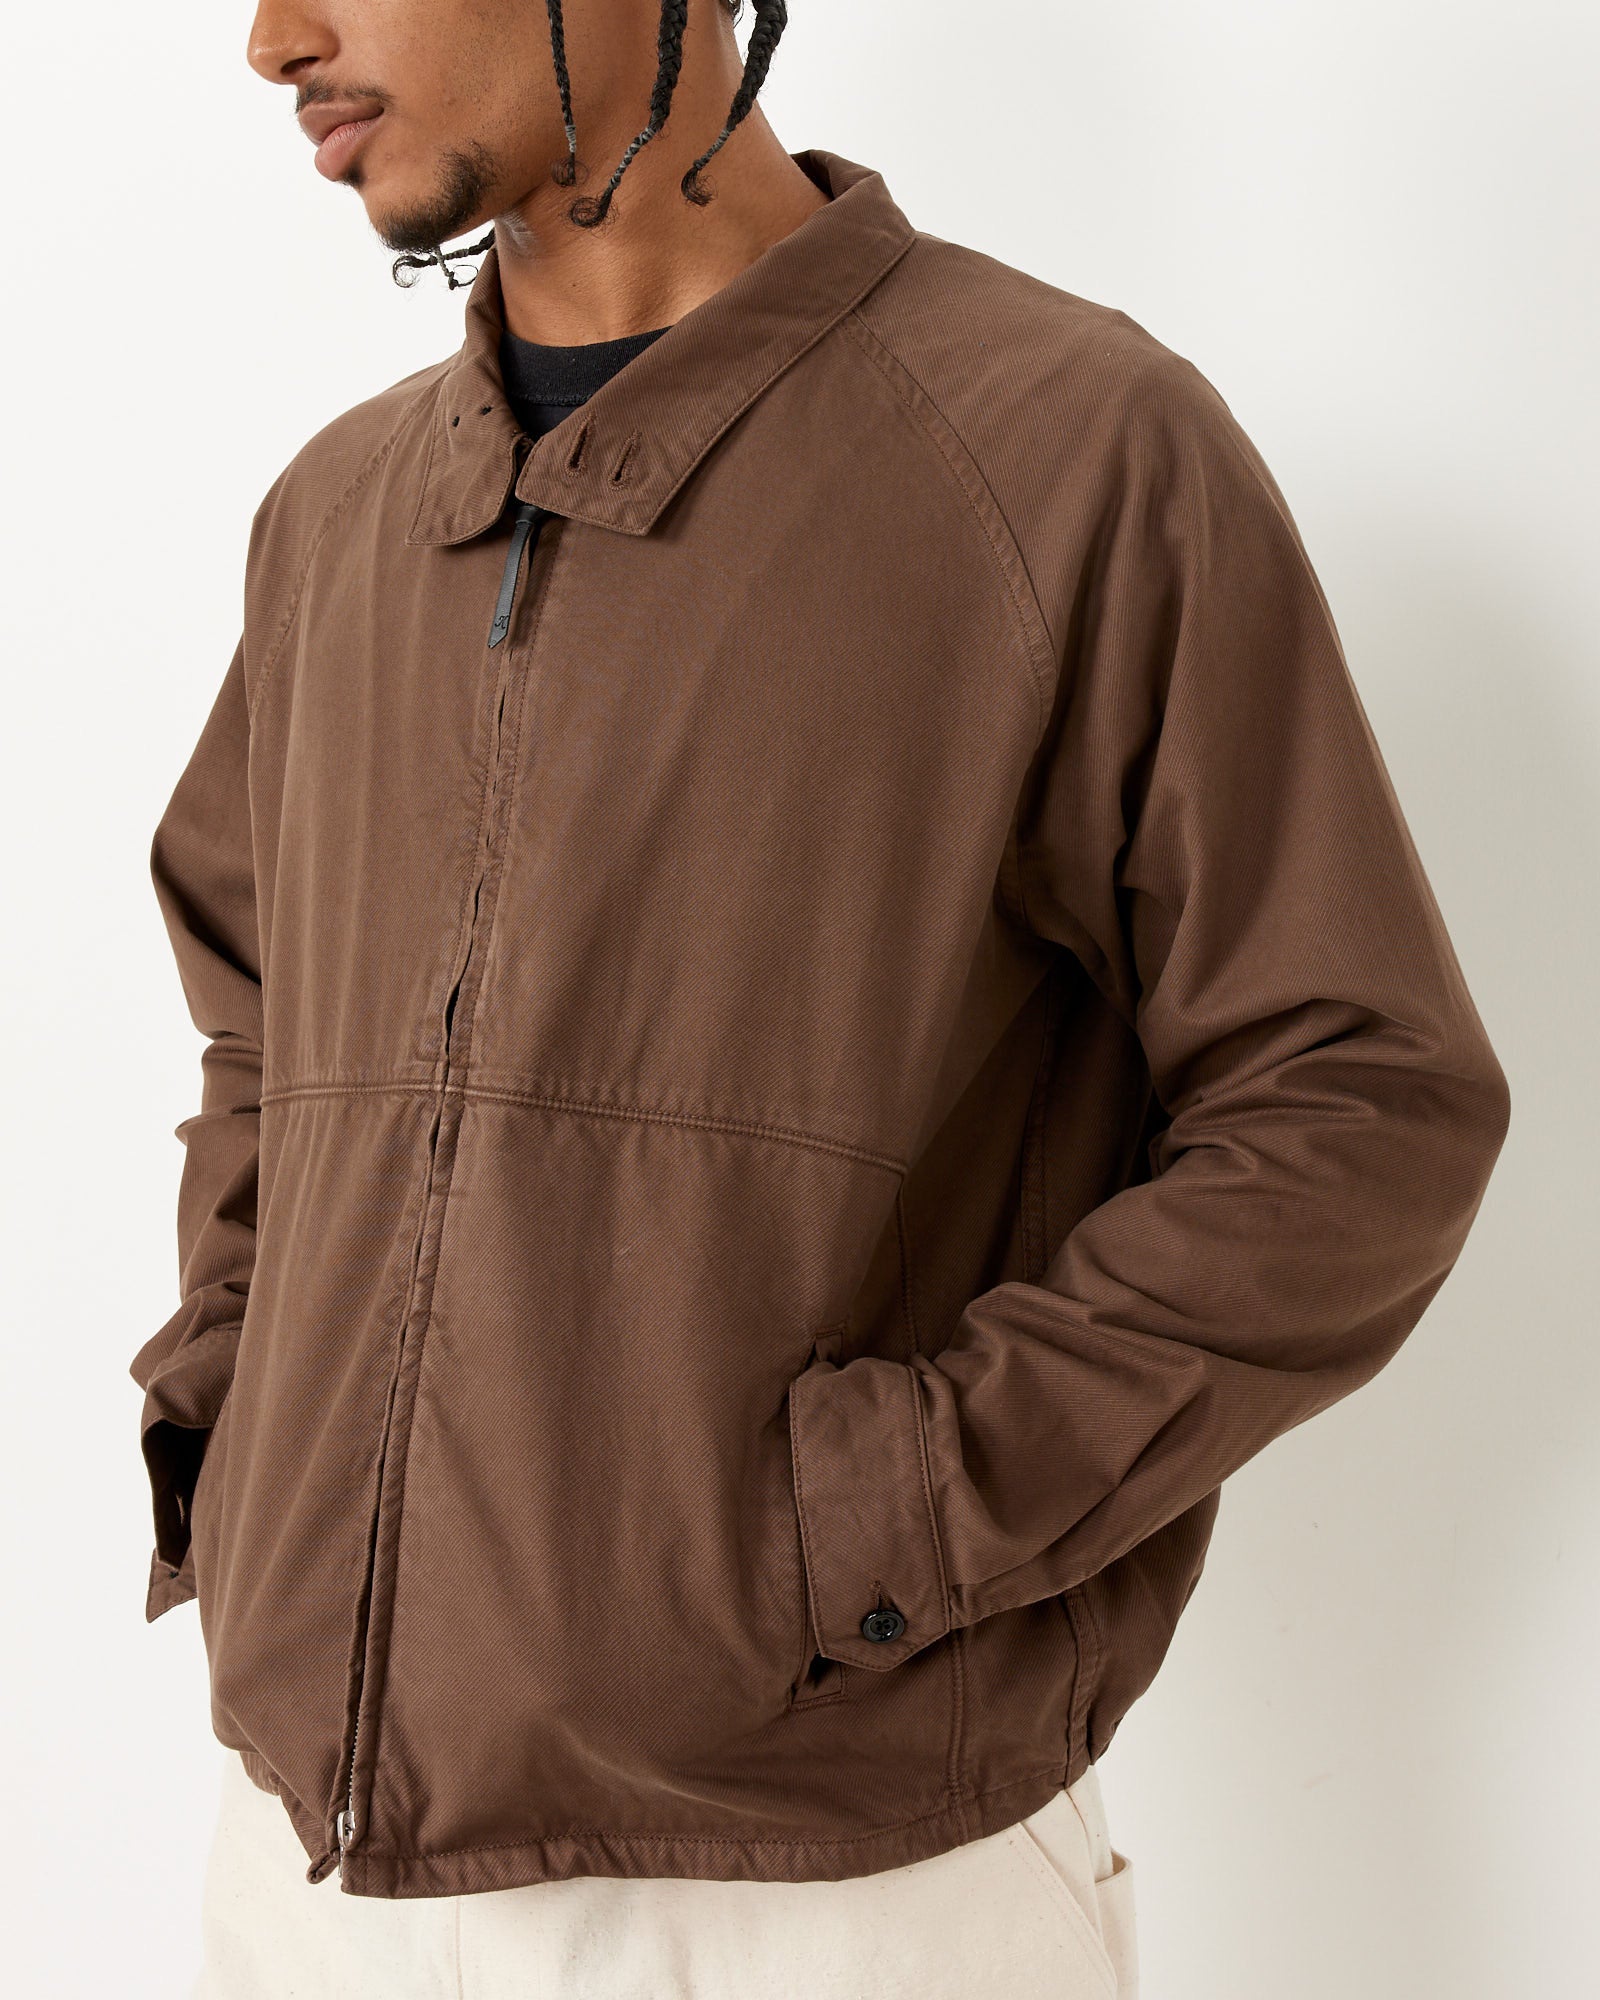 Manchester Jacket in Brown